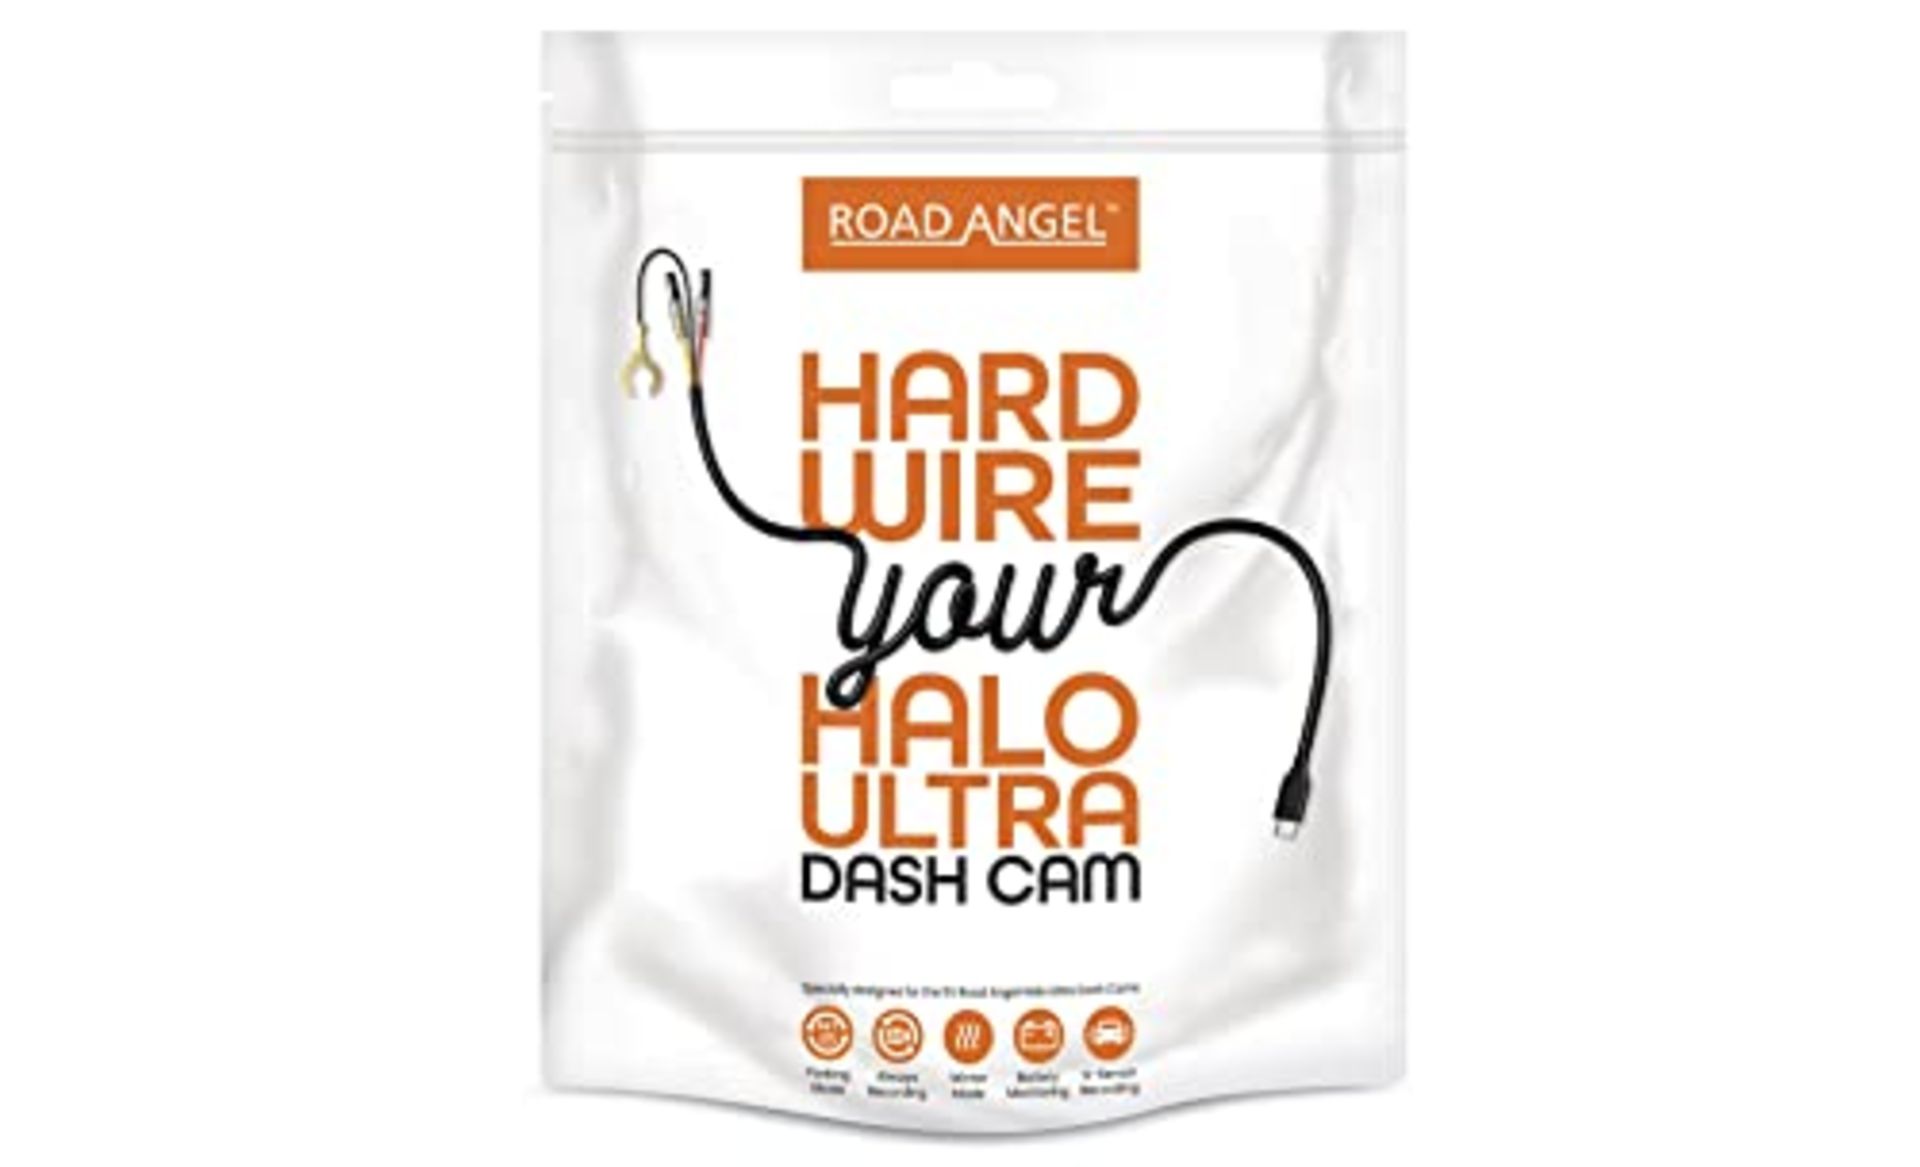 Road Angel Hard Wiring Kit for Road Angel Halo Ultra and Pure Touch/Vision. Enables al